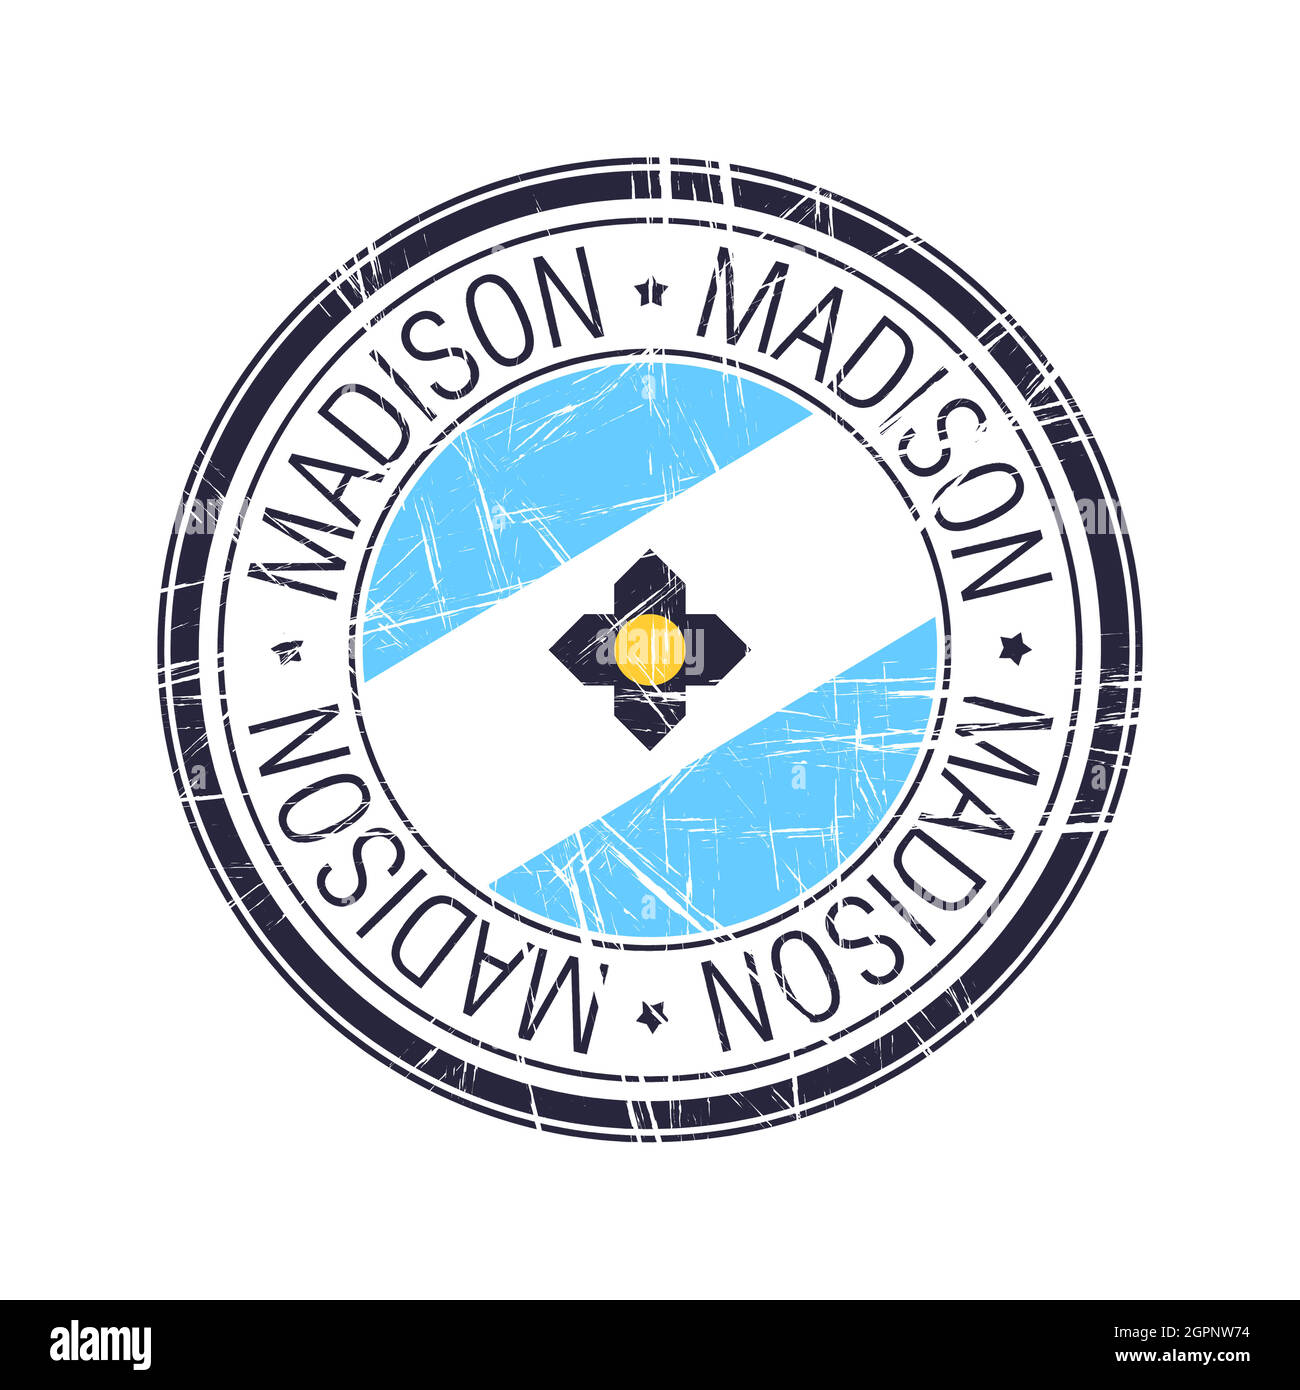 City of Madison, Wisconsin vector stamp Stock Vector